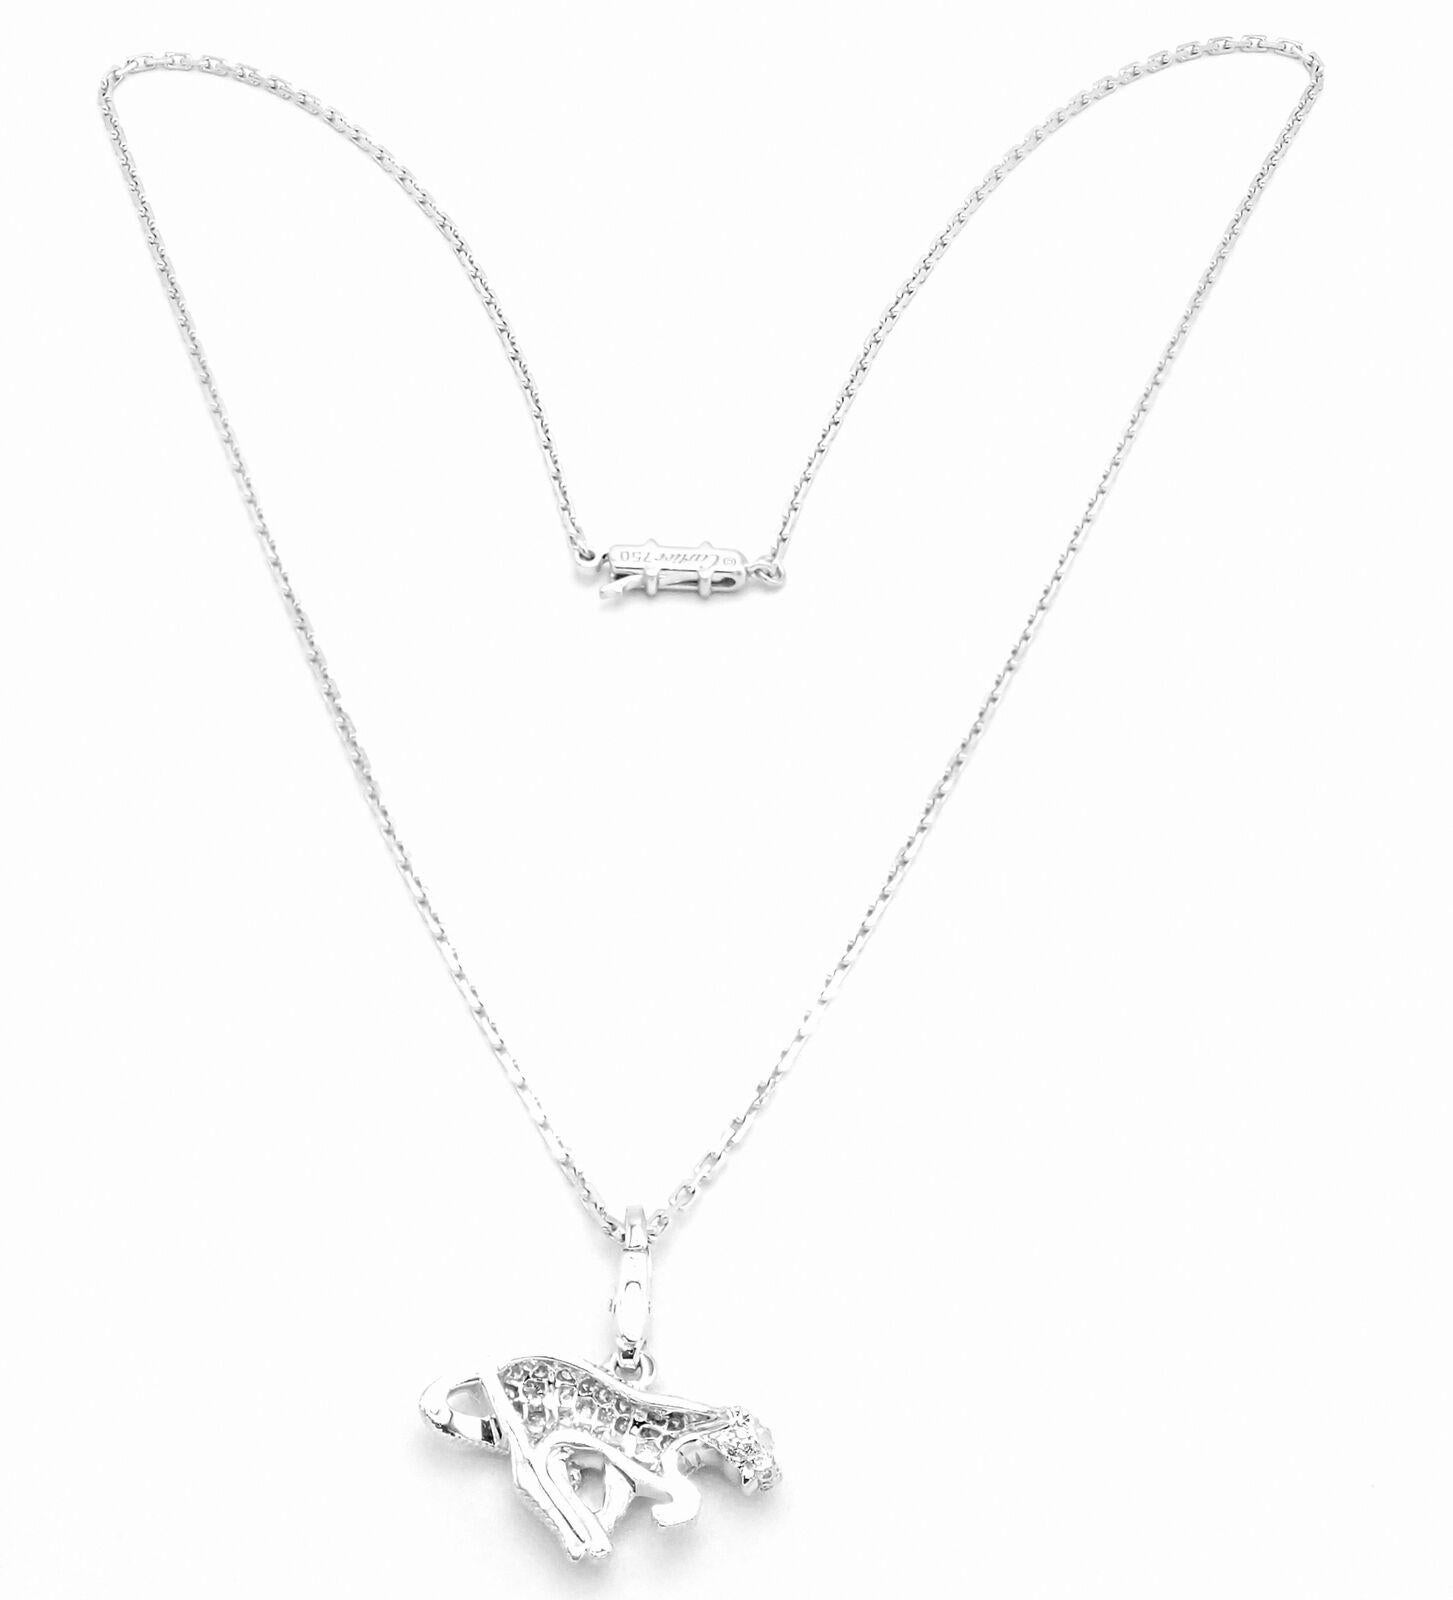 Cartier Panther Panthere Diamond Pendant White Gold Necklace In Excellent Condition For Sale In Holland, PA